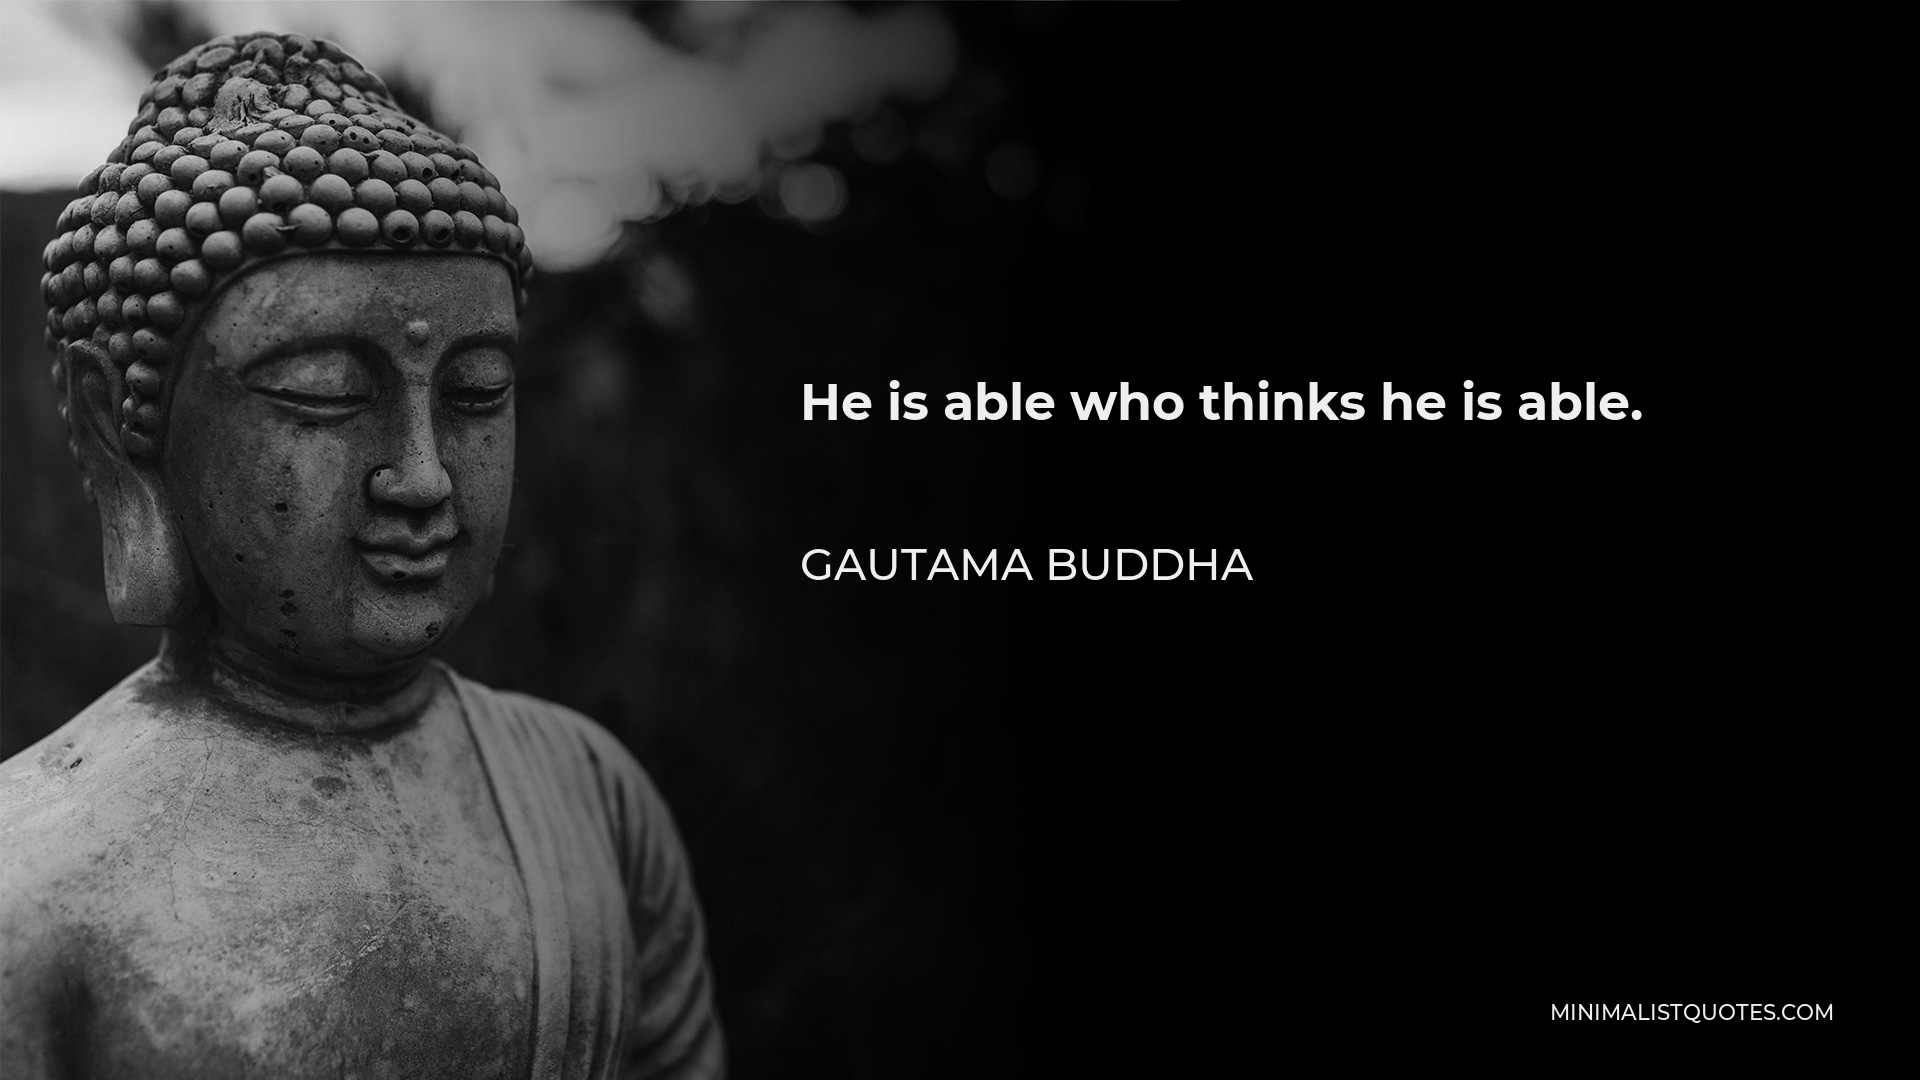 Gautama Buddha Quote - He is able who thinks he is able.